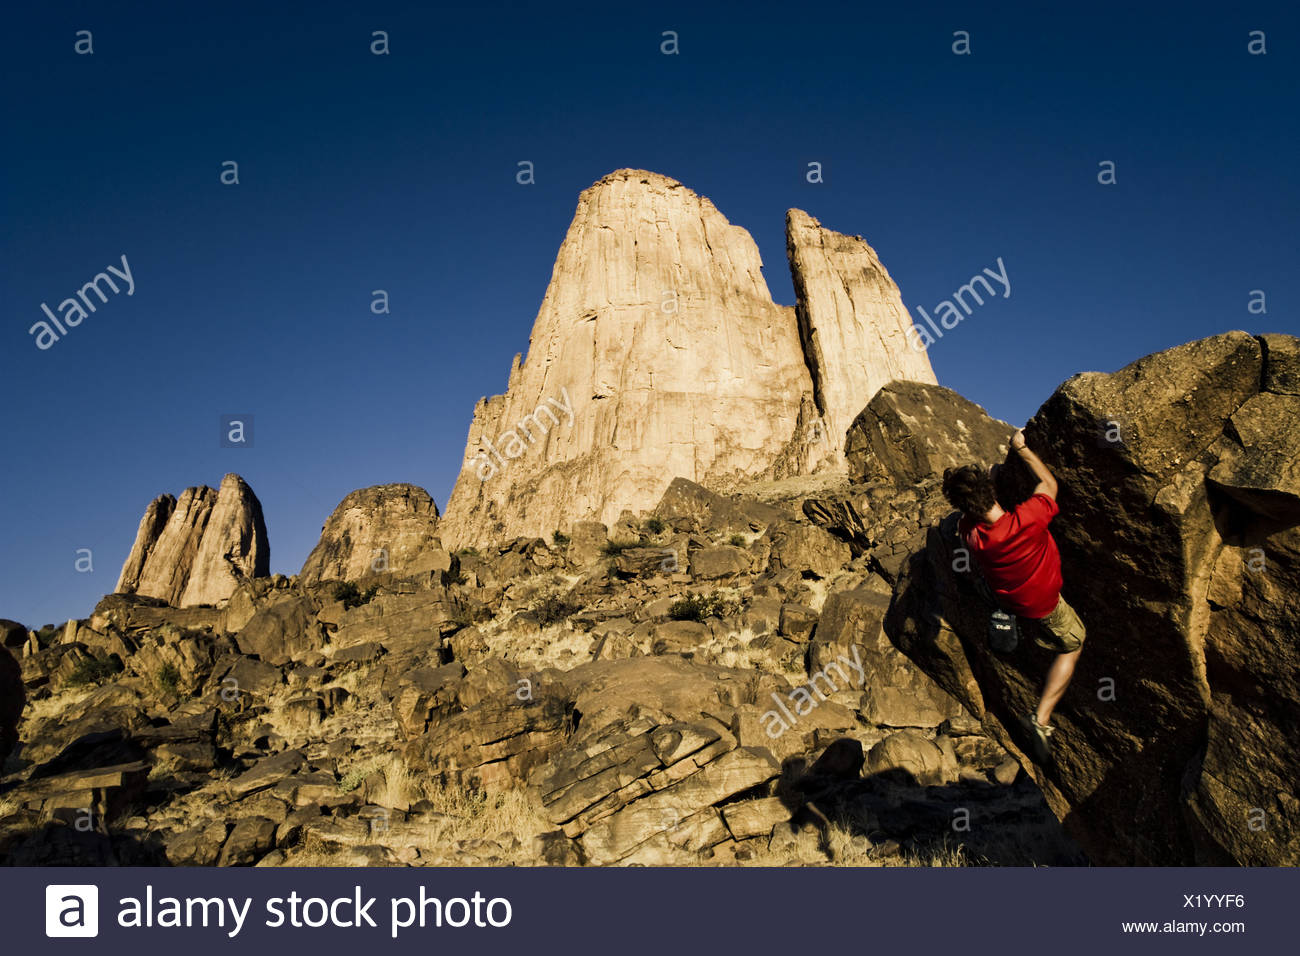 Young Man Bouldering Hand Of Fatima Under Blue Sky In The